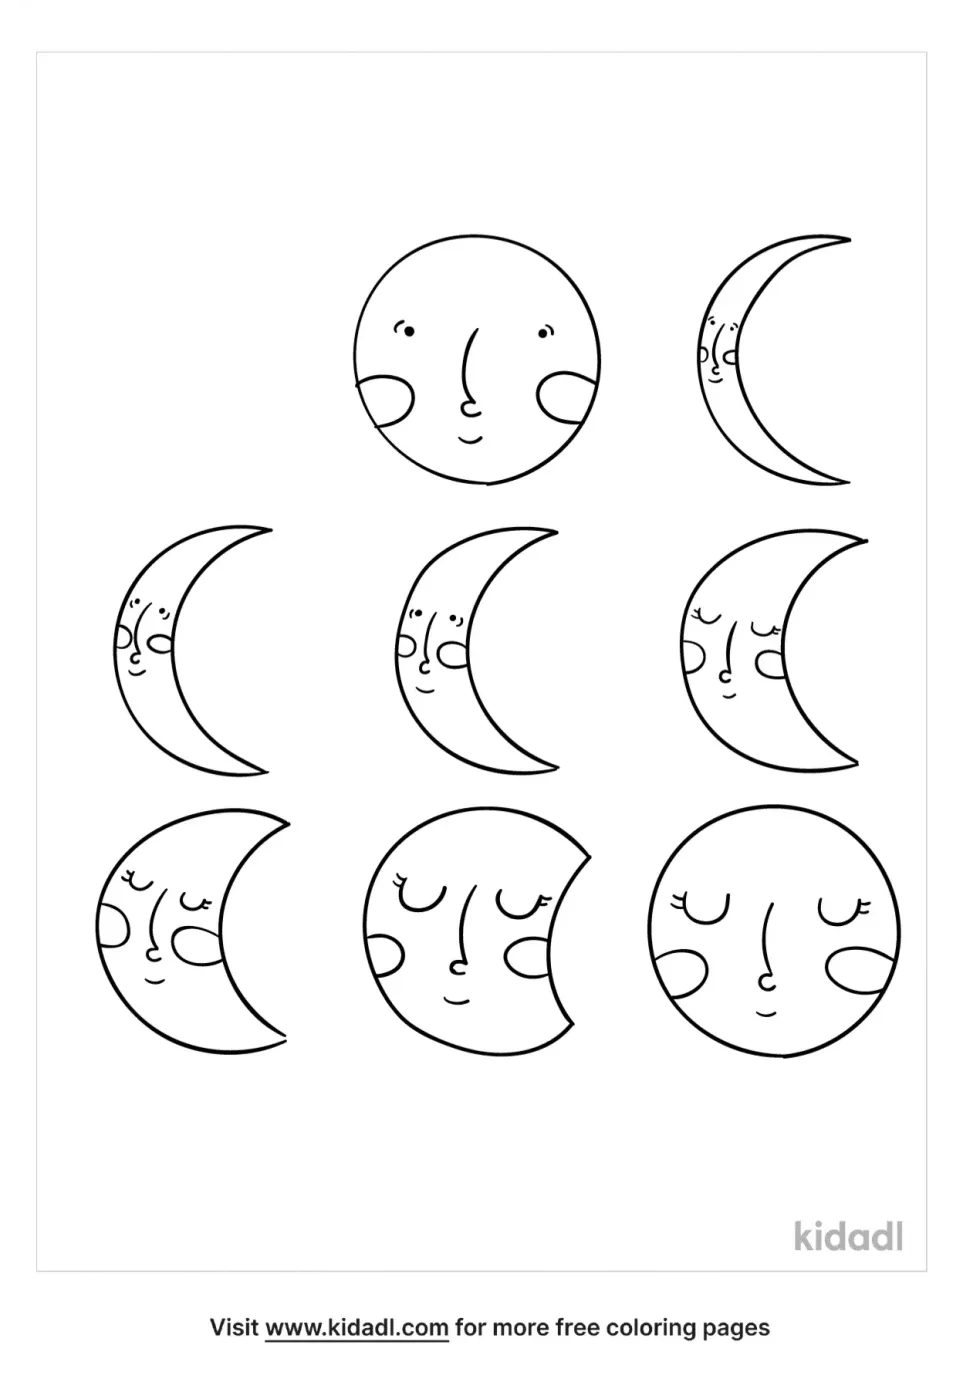 Phases Of The Moon Coloring Page